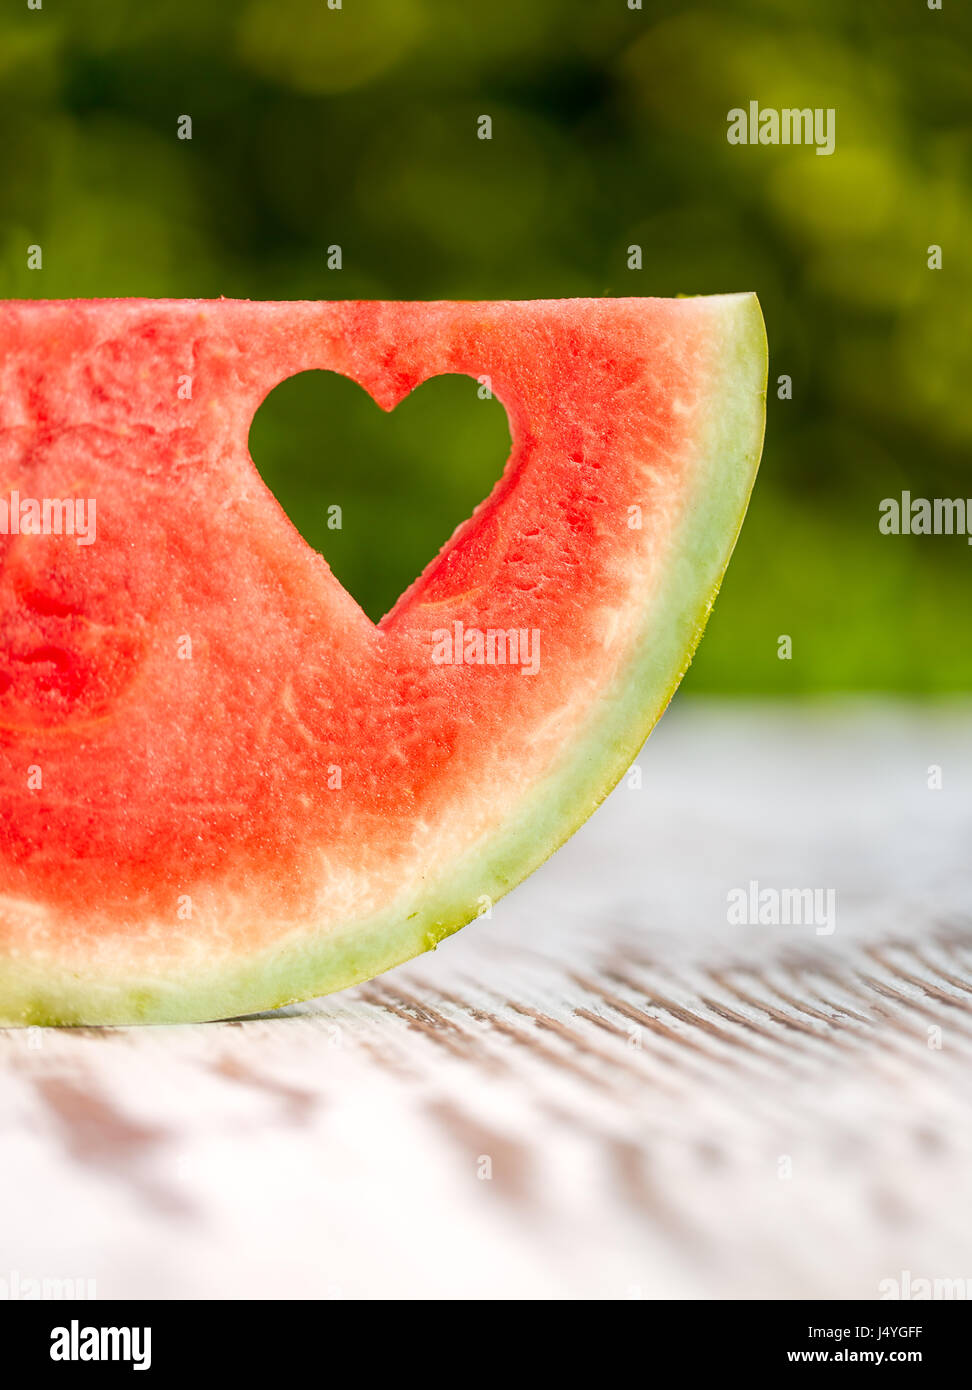 slice watermelon with a hole in the shape of heart on a wooden table Stock Photo